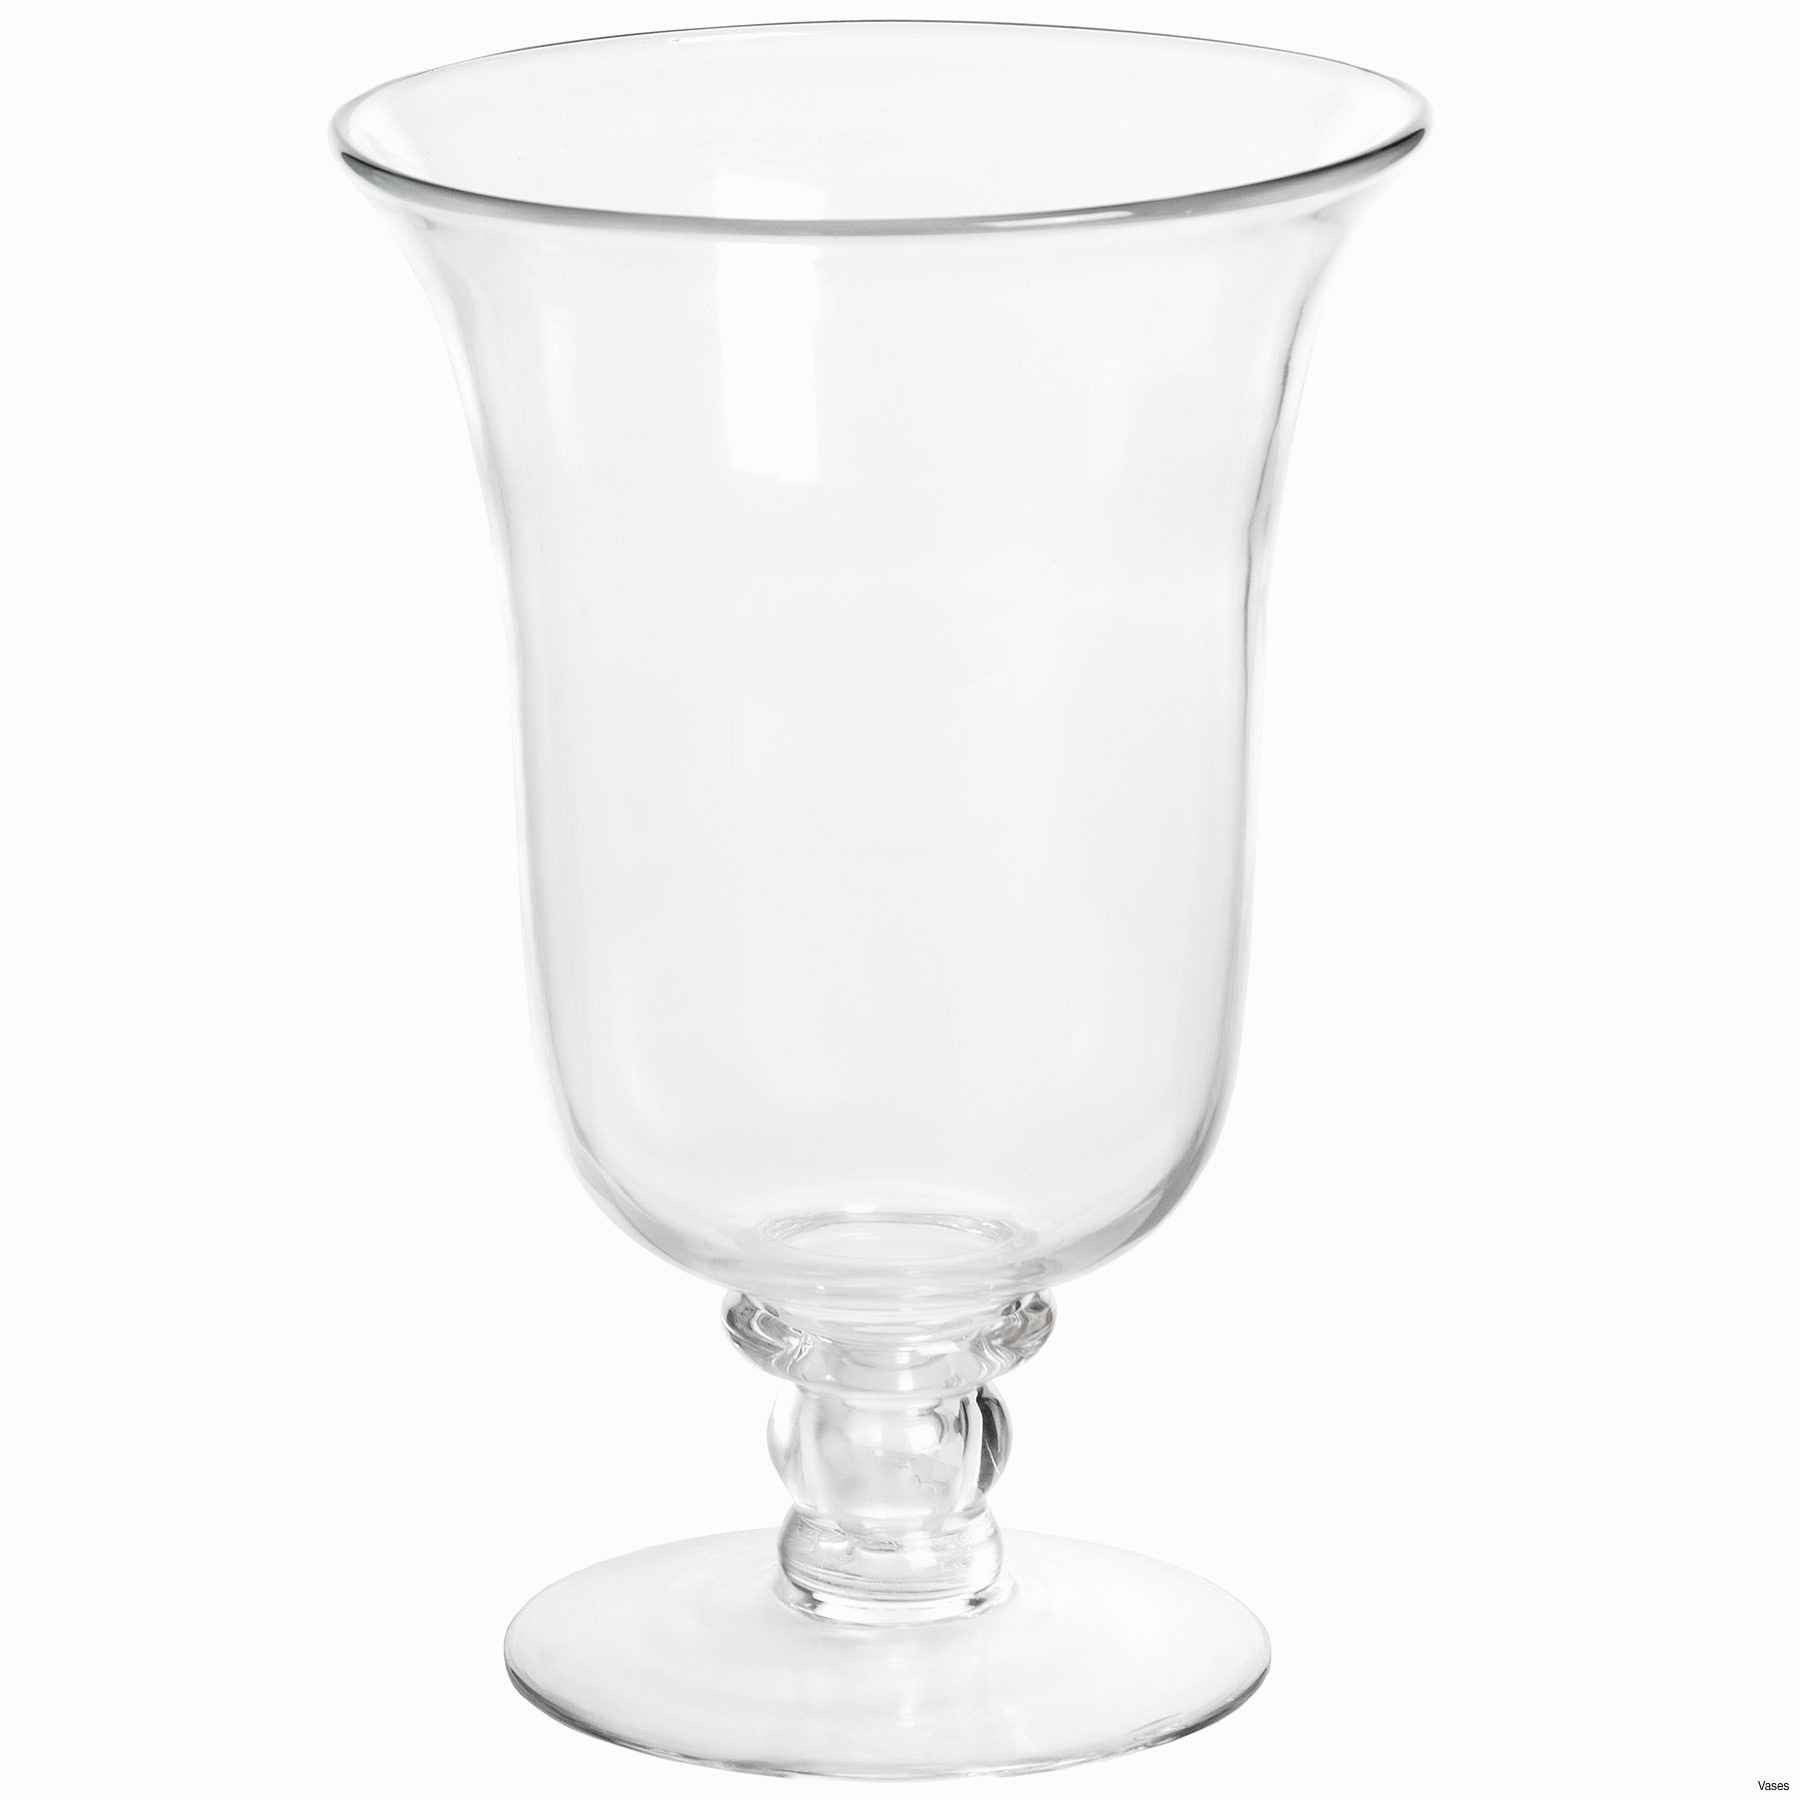 vases in bulk for wedding of candle stands wholesale lovely faux crystal candle holders alive pertaining to candle stands wholesale lovely faux crystal candle holders alive vases gold tall jpgi 0d cheap in